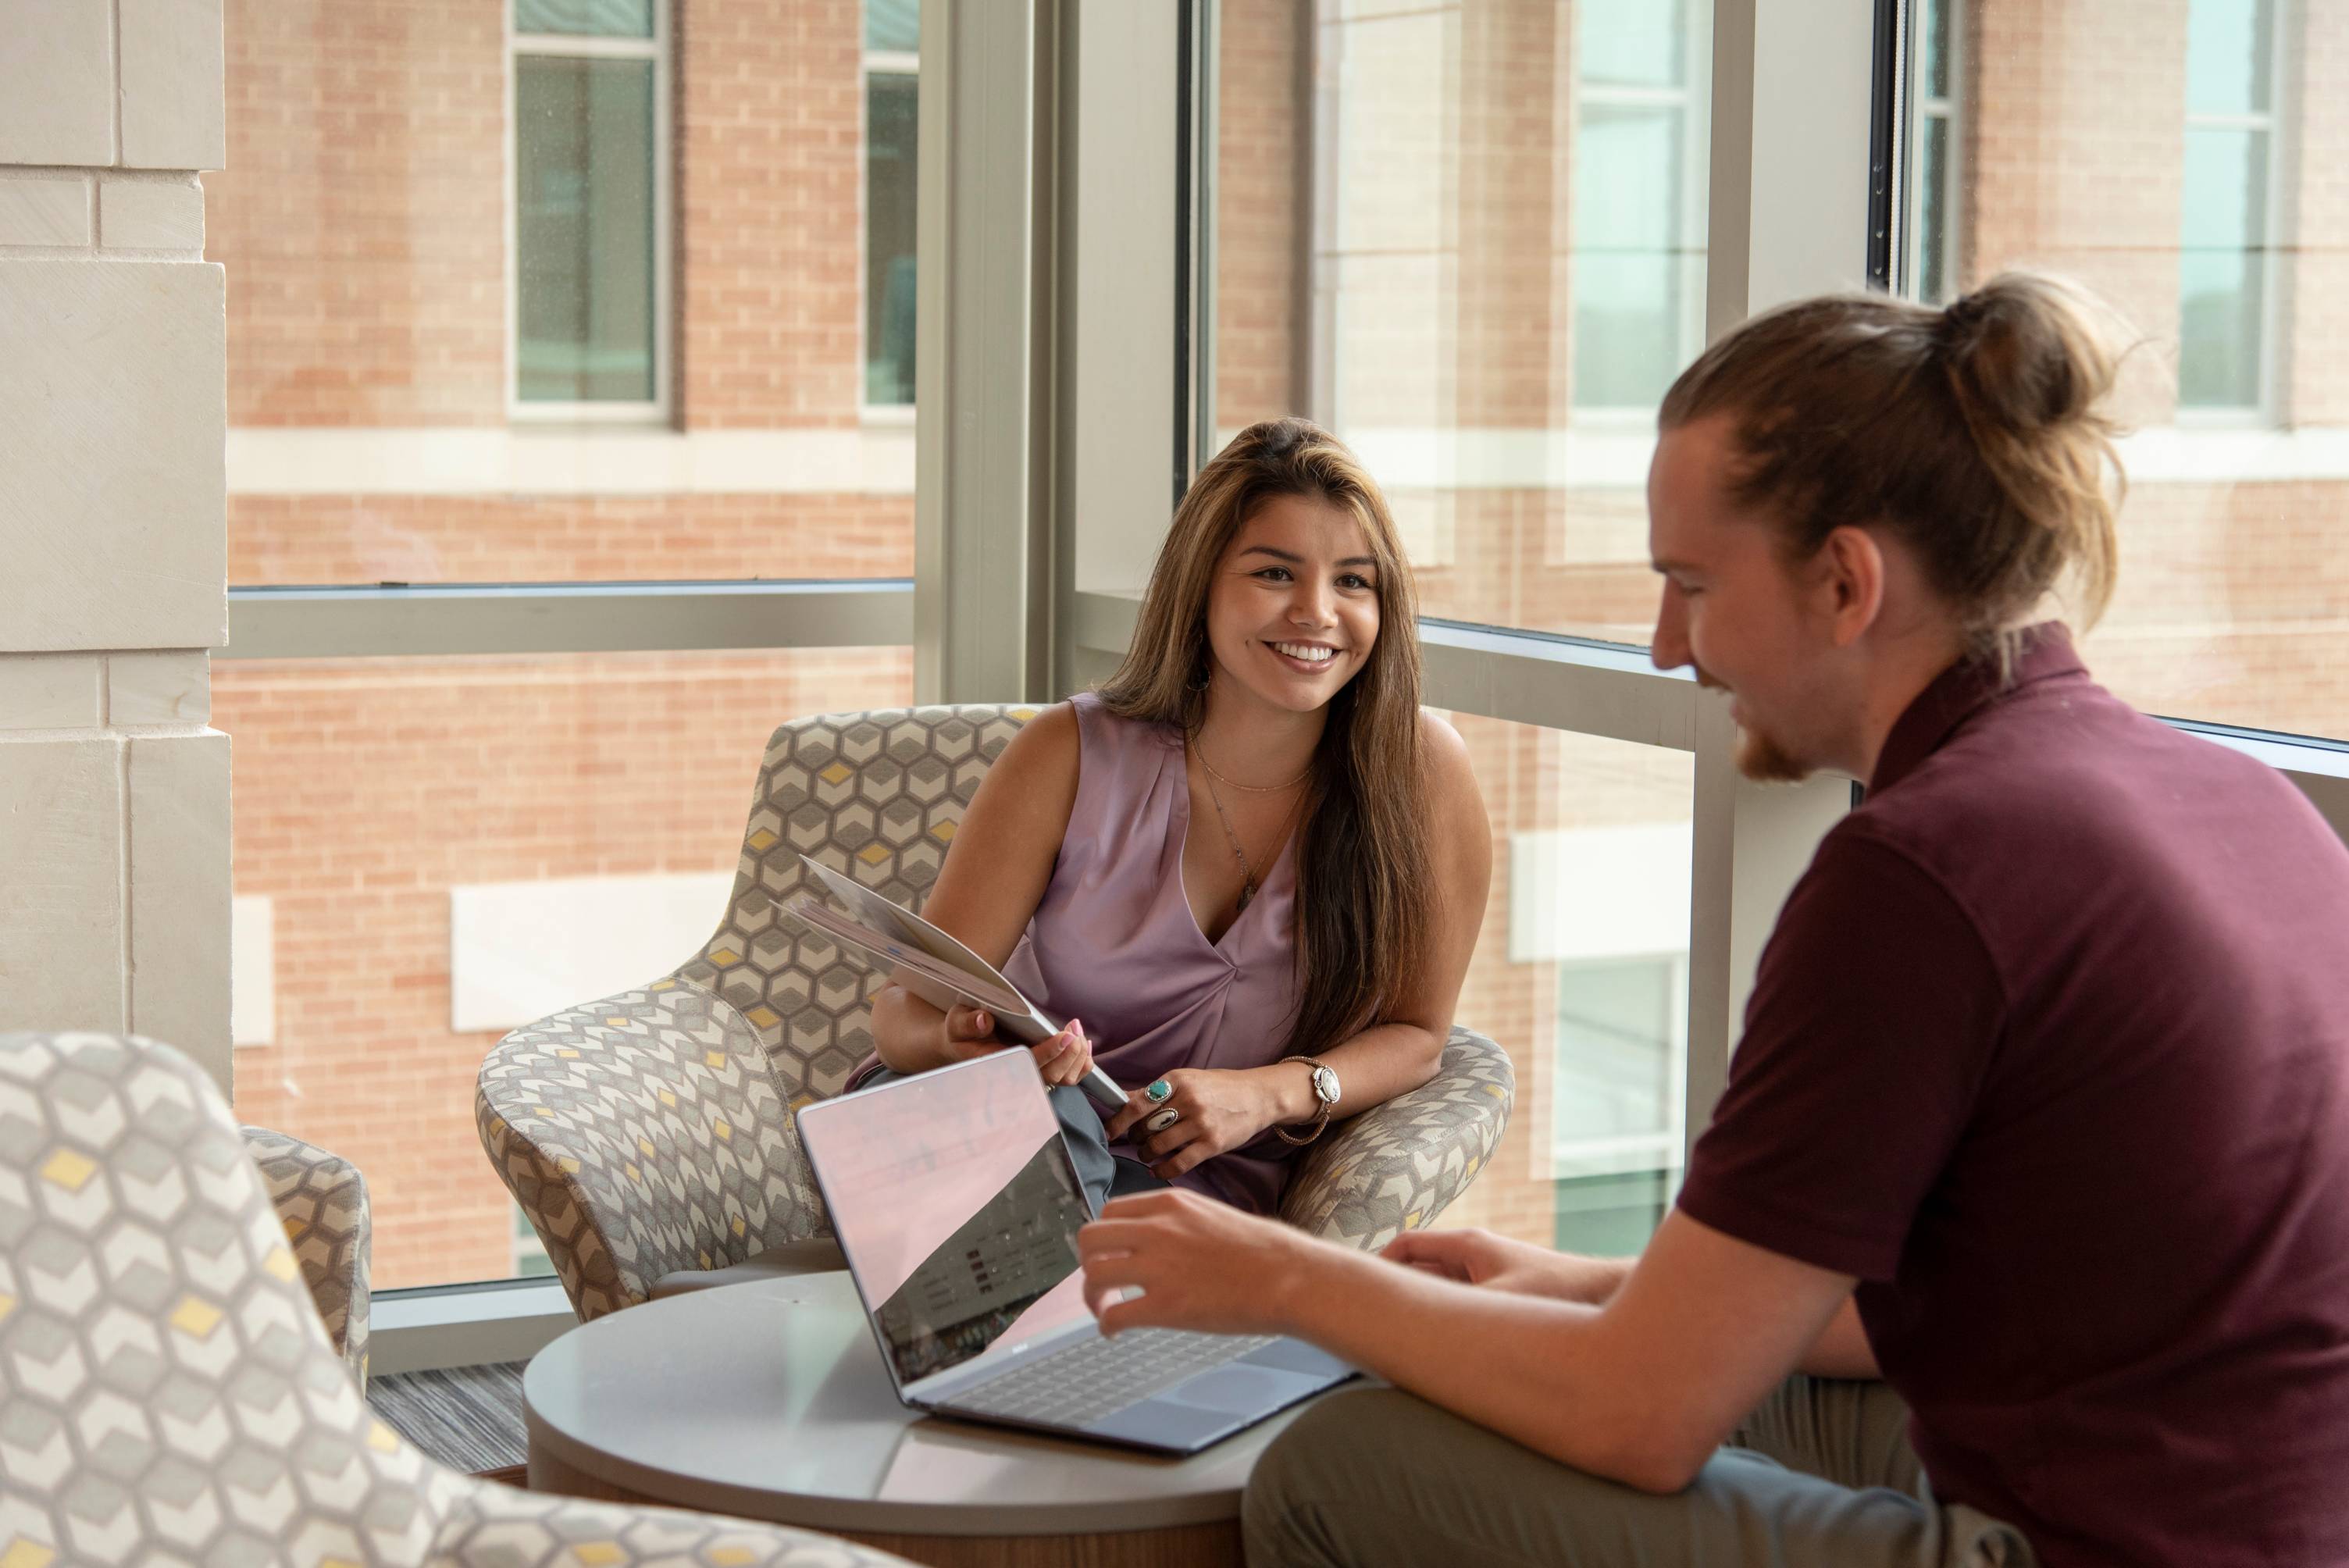 students studying at a workspace in lbj student center.